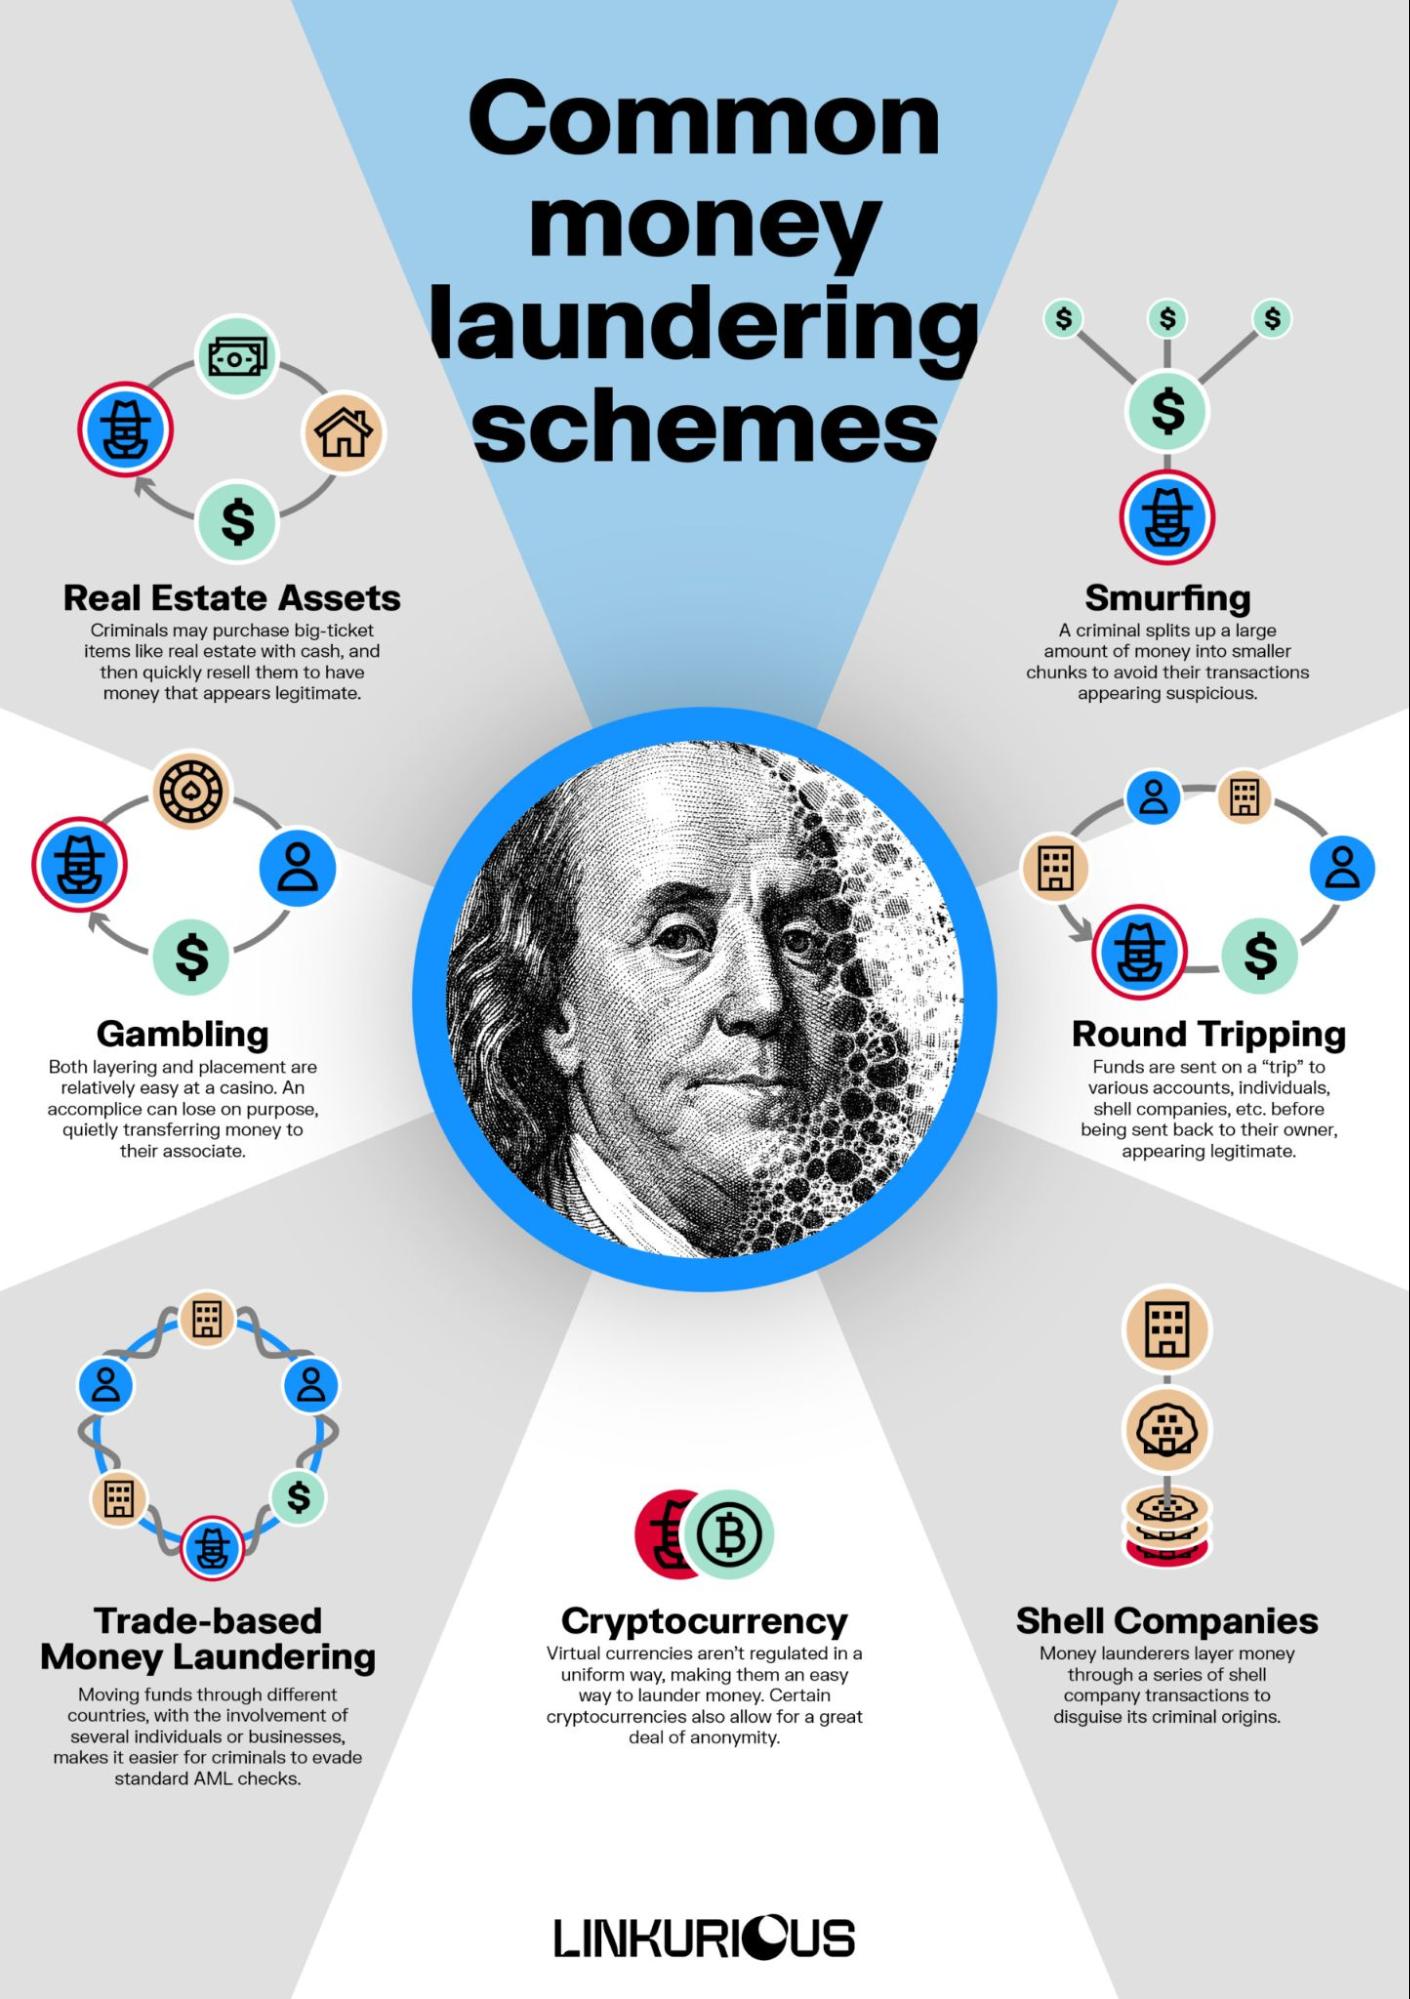 An infographic showing different types of money laundering schemes: real estate assets, gambling, trade-based money laundering, cryptocurrency, shell companies, round-tripping, and smurfing